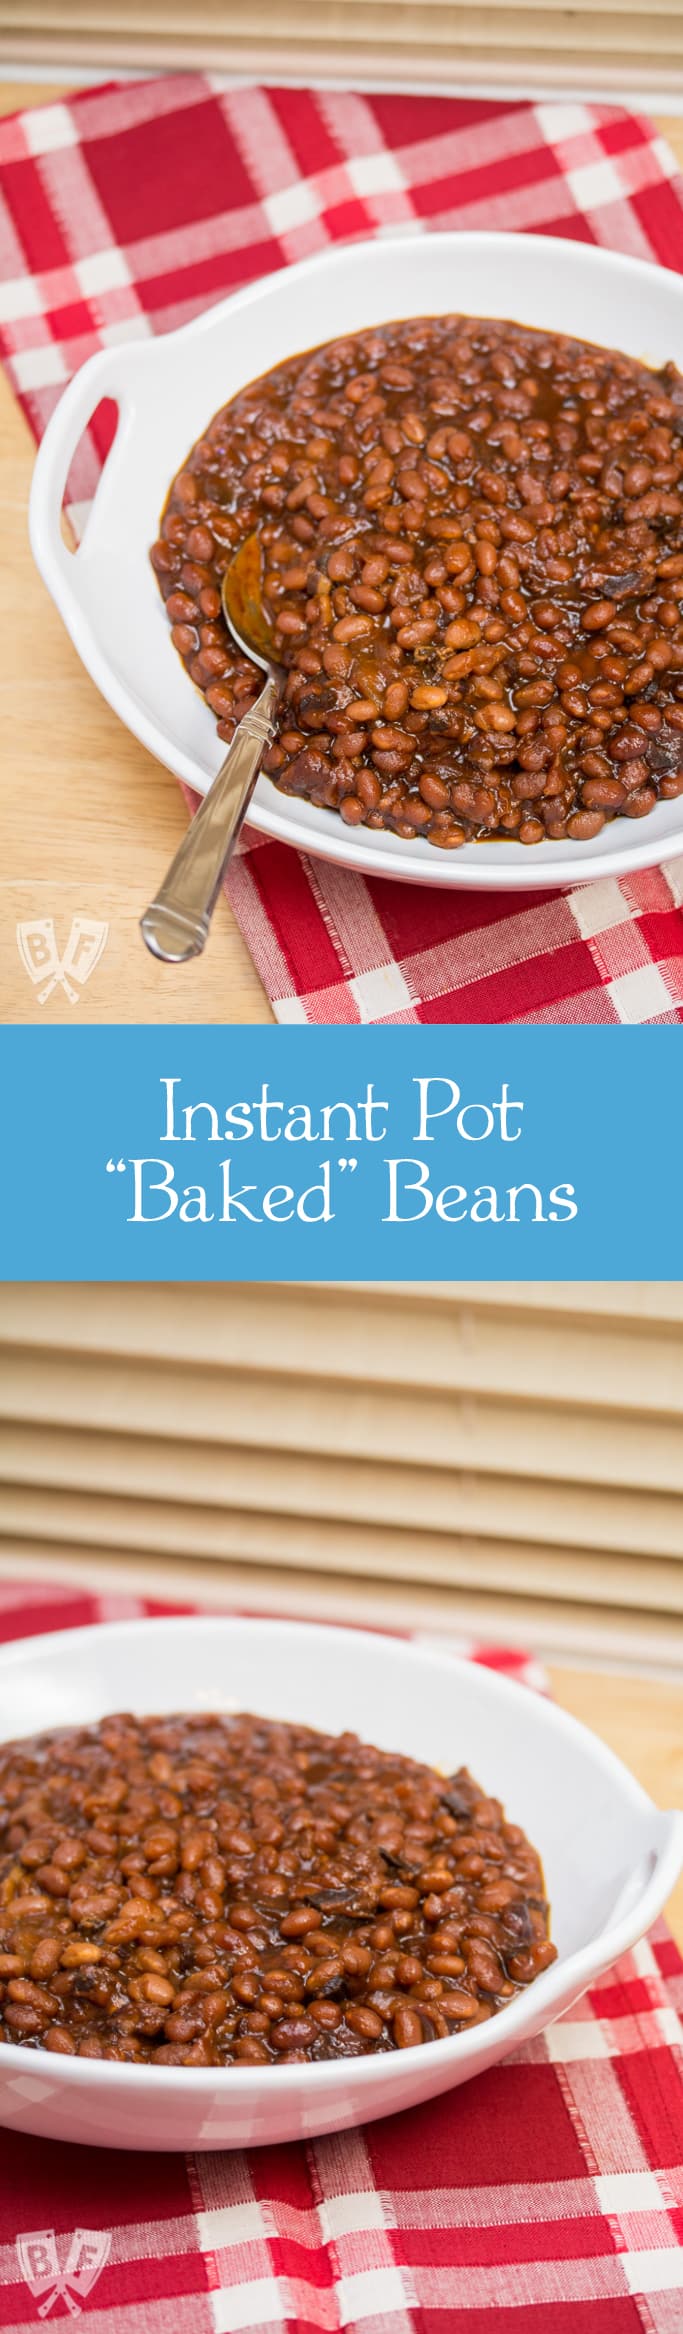 Instant Pot "Baked" Beans: Bacon and molasses take this sweet-and-salty side dish to the next level!